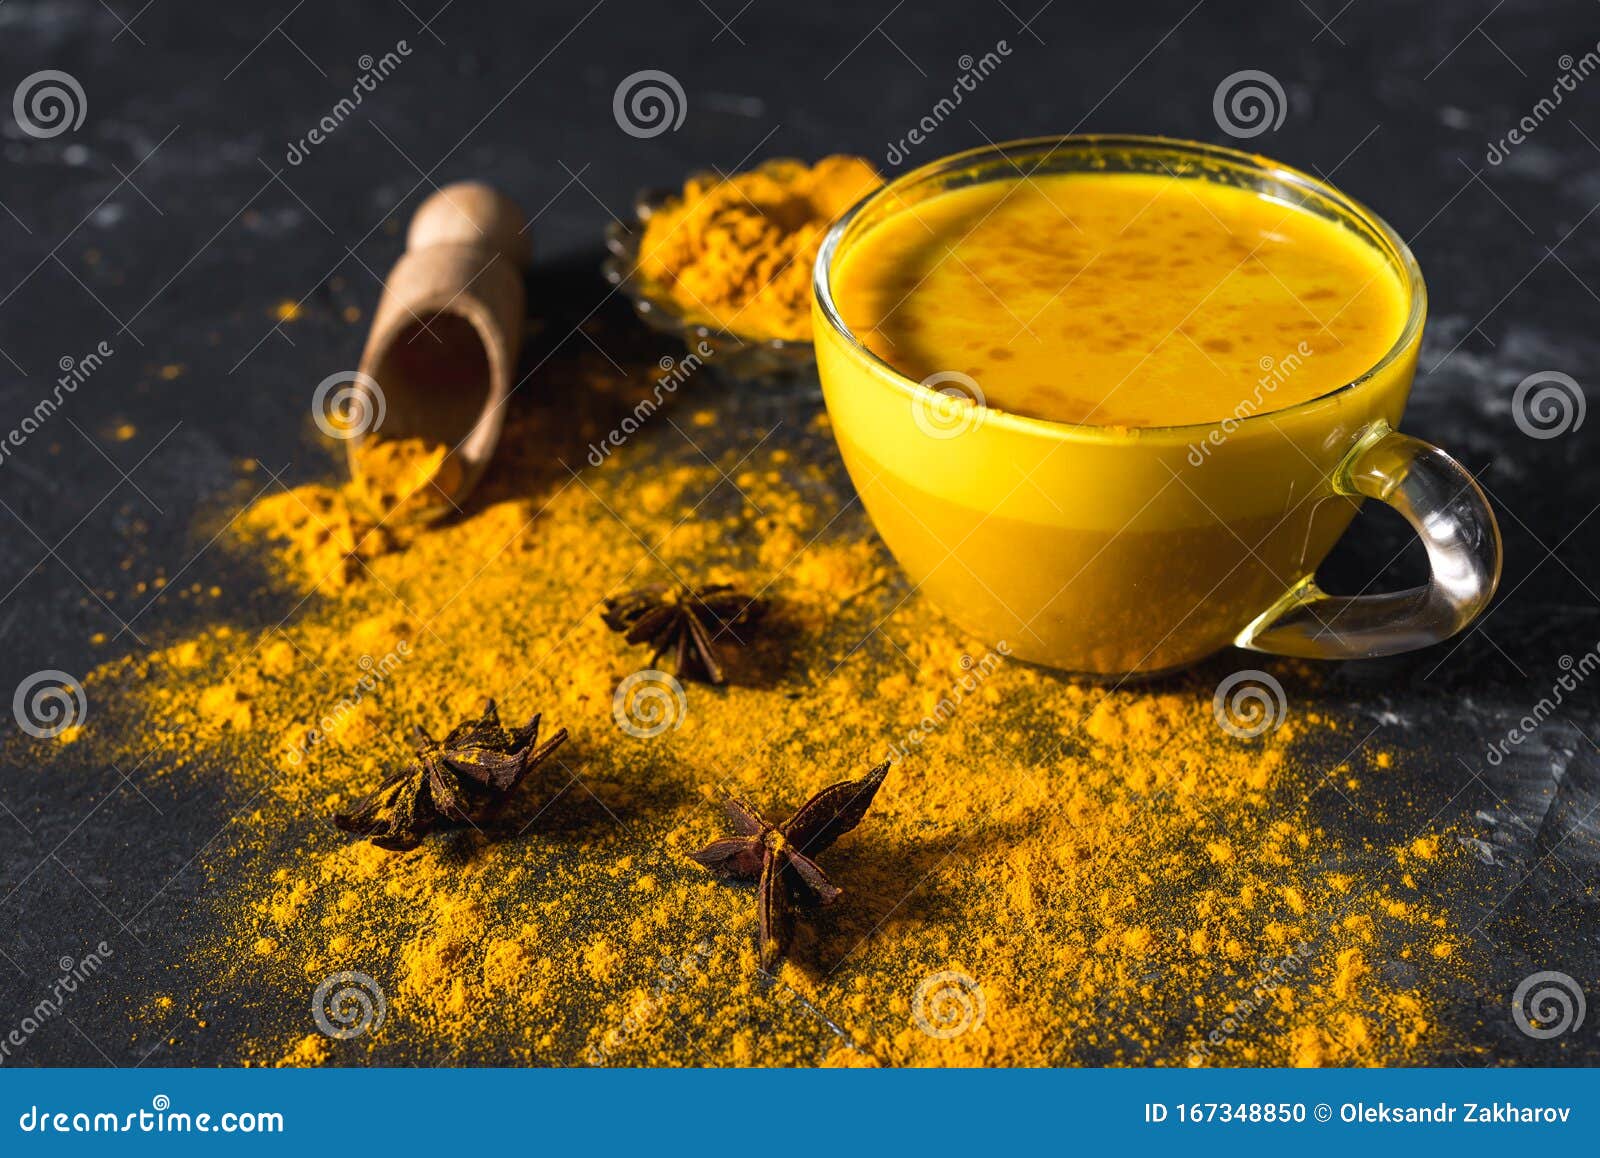 Golden Turmeric Milk on the Dark Background with Spices Cinnamon and ...